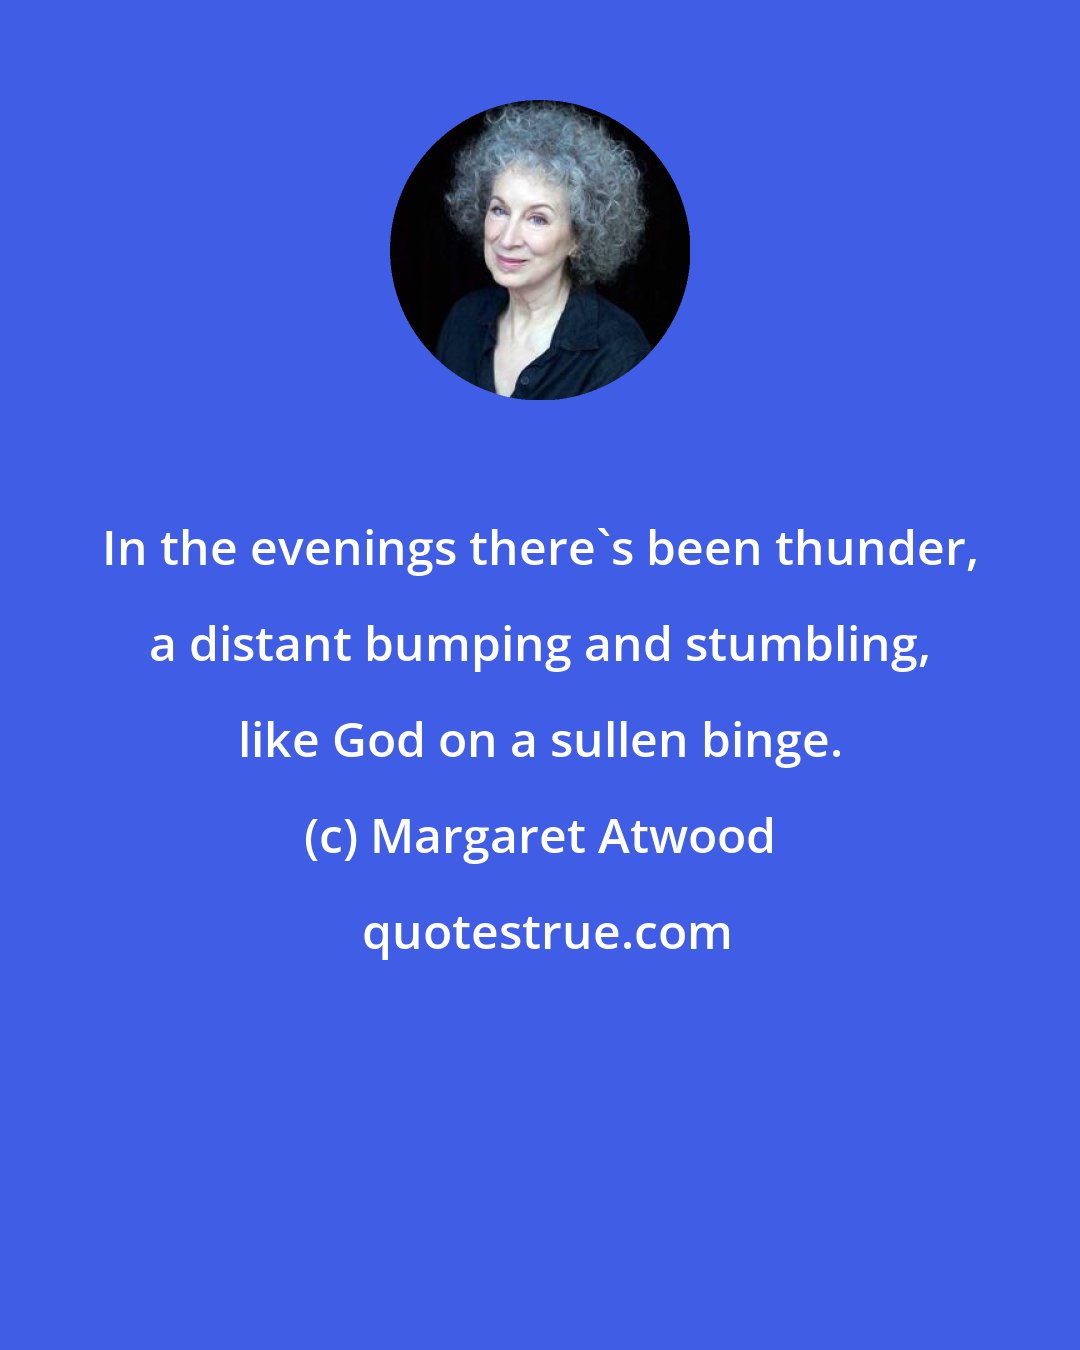 Margaret Atwood: In the evenings there's been thunder, a distant bumping and stumbling, like God on a sullen binge.